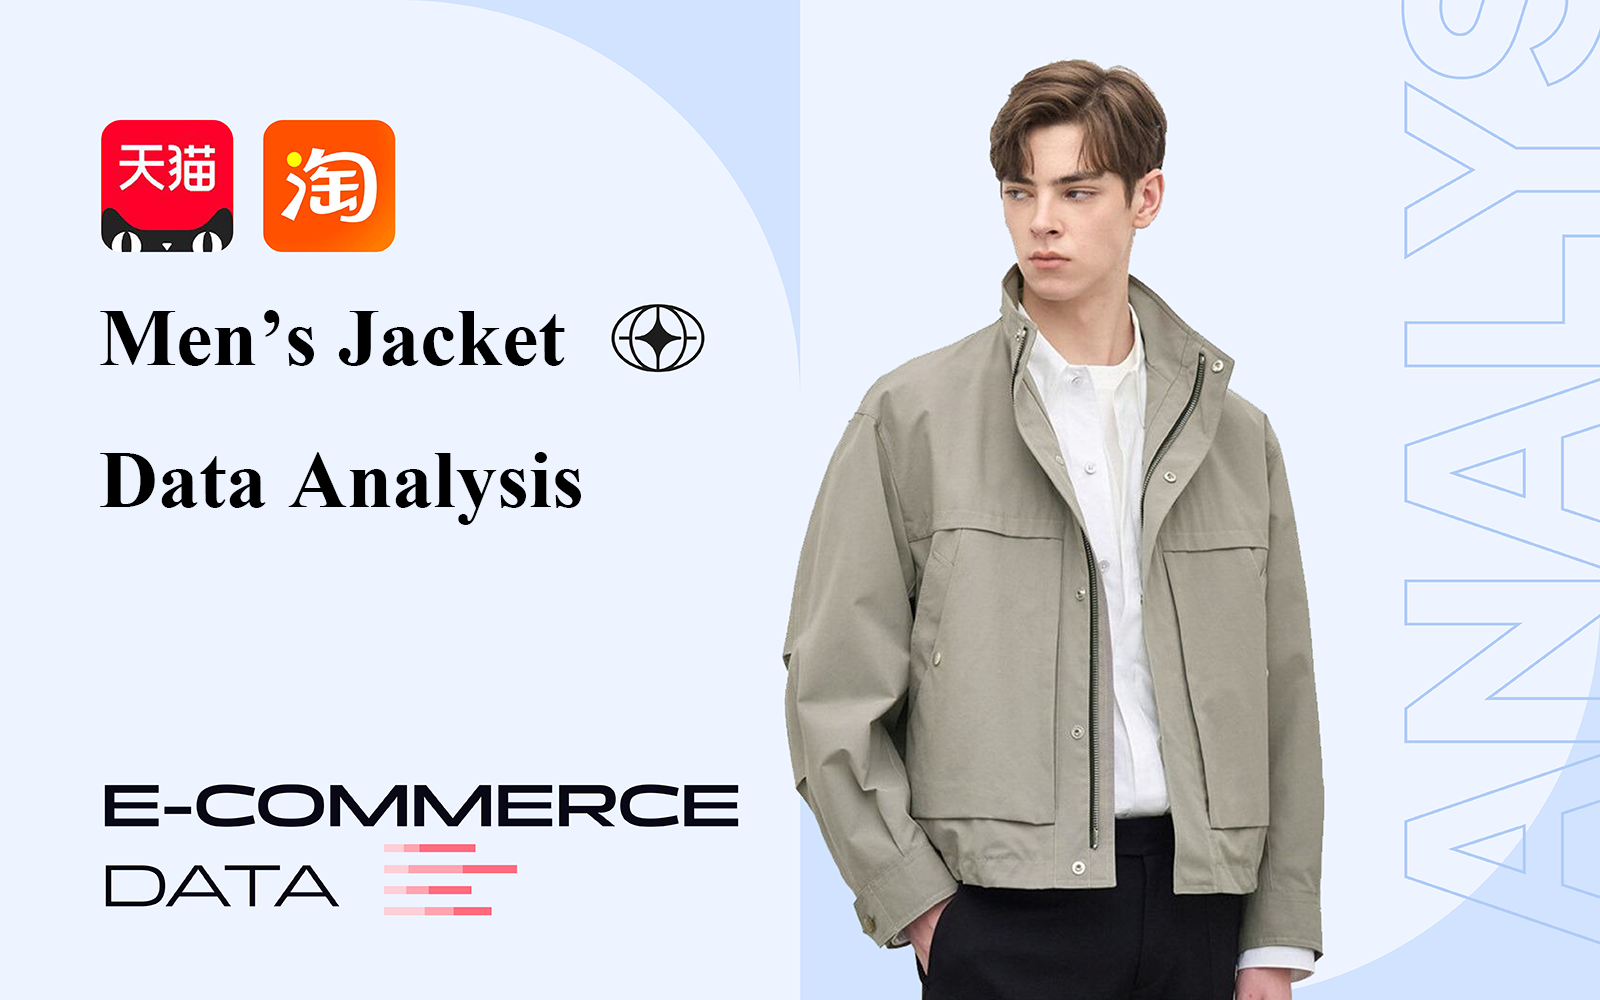 Jackets -- The Data Analysis of Menswear E-Commerce